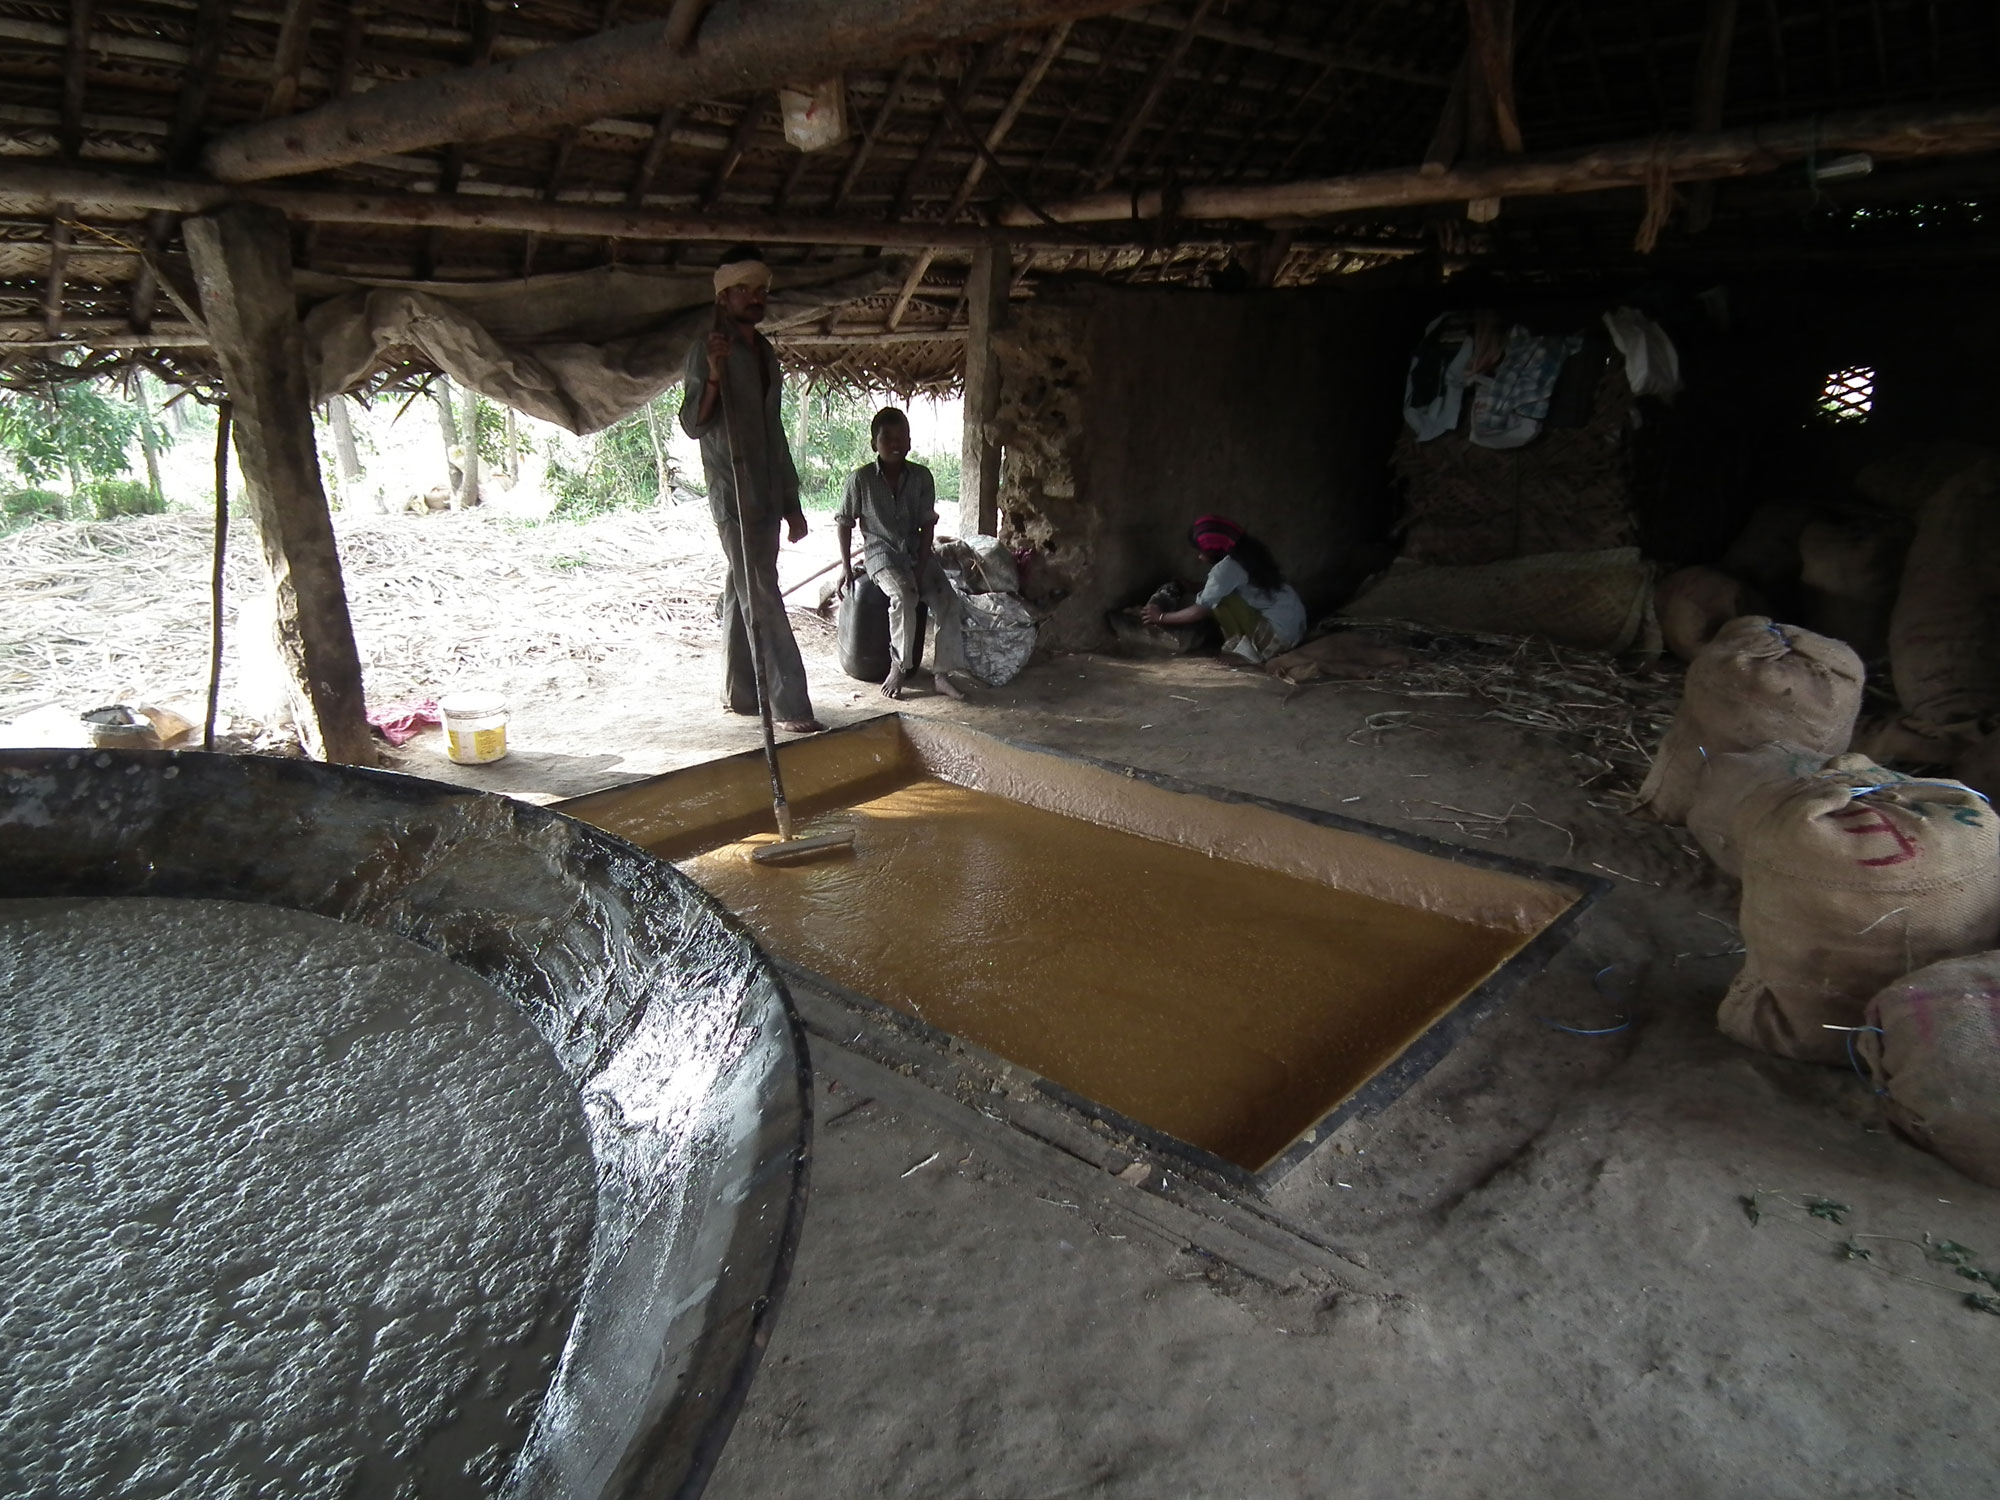 Photograph showing people making jaggery, a traditional type of minimally processed sugar, in Marayoor, India. Sugarcane syrup is cooking in a pan in the lower left corner of the image, whereas brown syrup that has been thickened by evaporation is sitting in a rectangular pan in the floor at the center of the image.